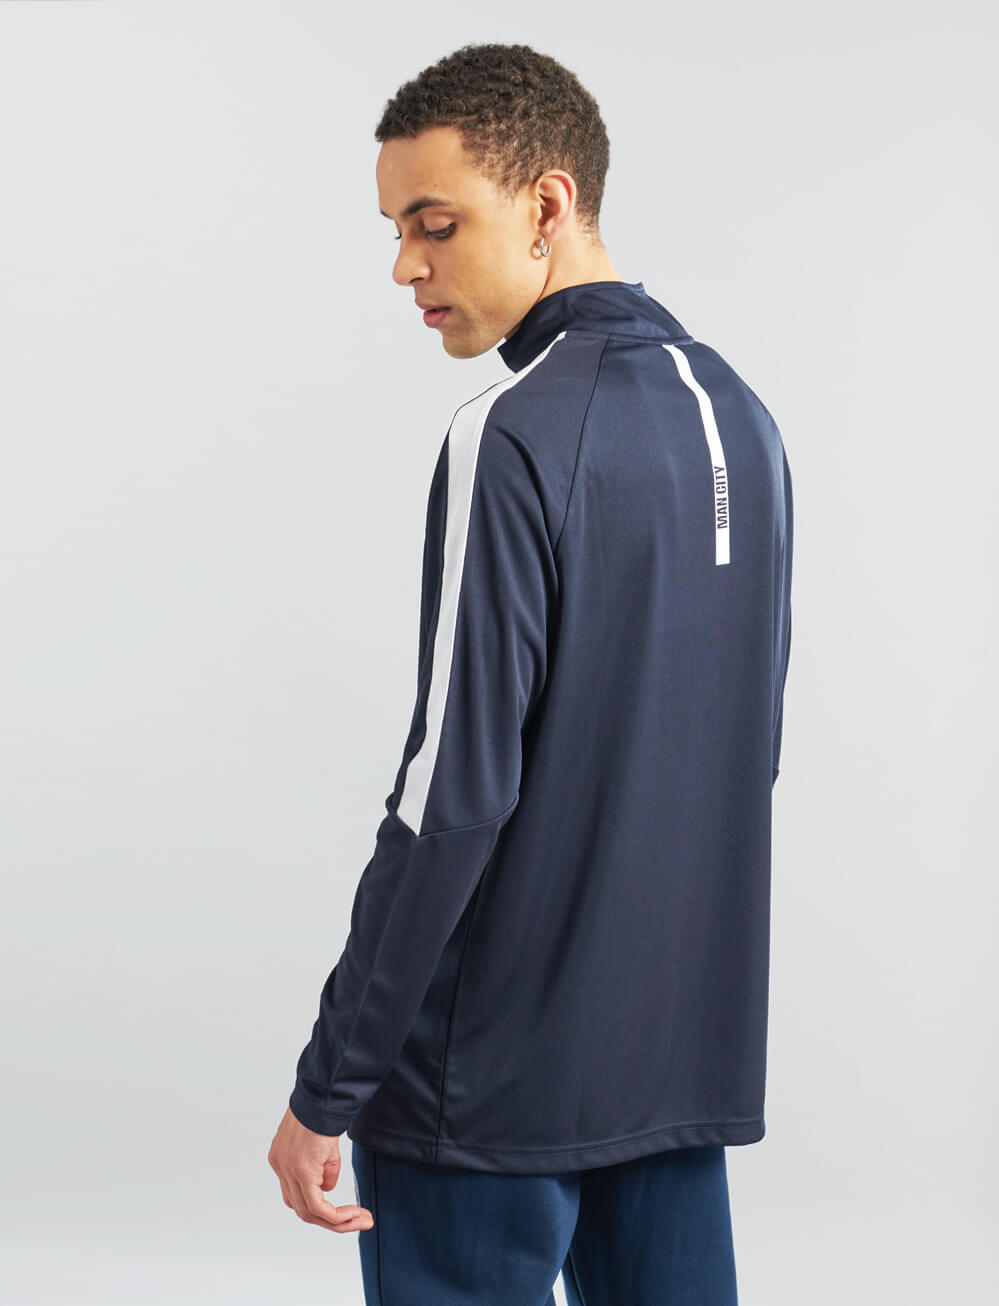 Official Manchester City 1/4 Zip Track Top - Navy - The World Football Store